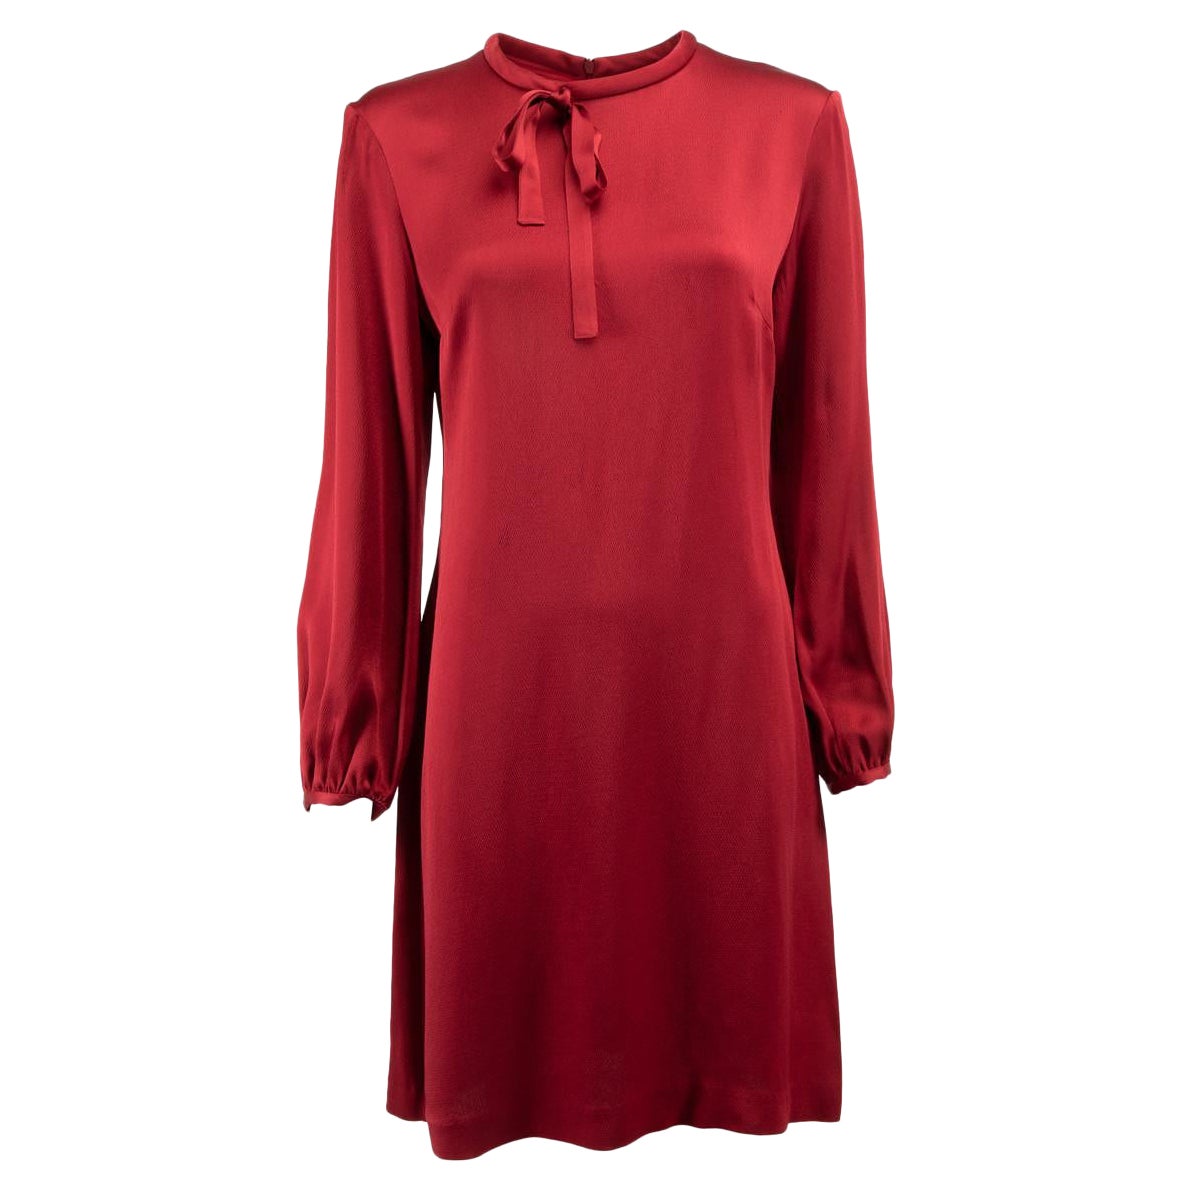 Red Long Sleeve Tie Neck Dress Size M For Sale